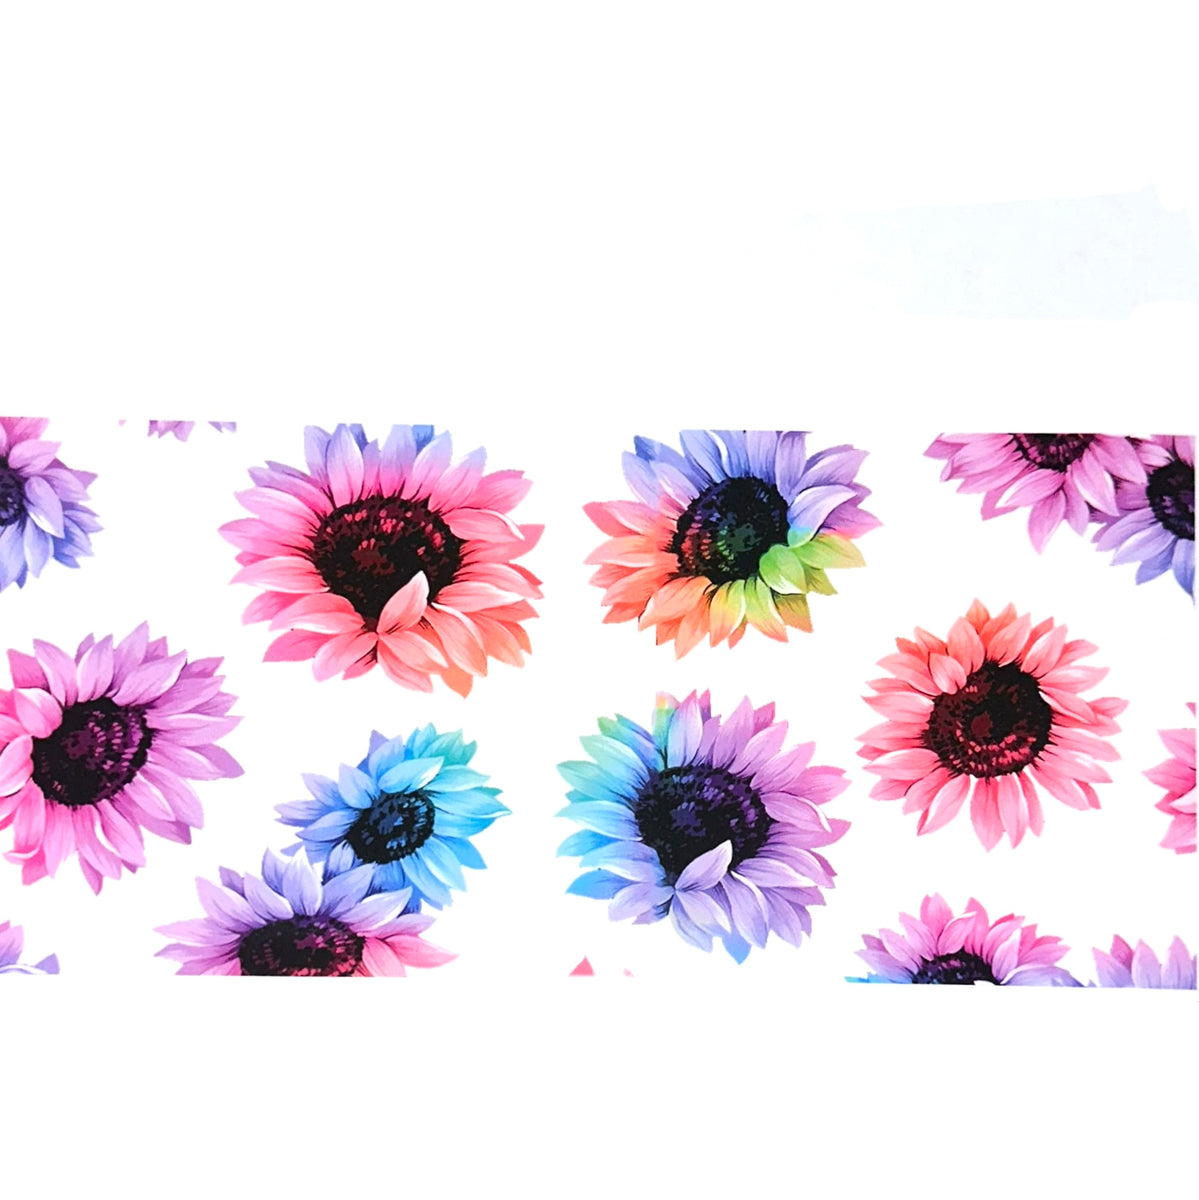 Spring Flowers UVDTF cup wrap – Parker + Rae